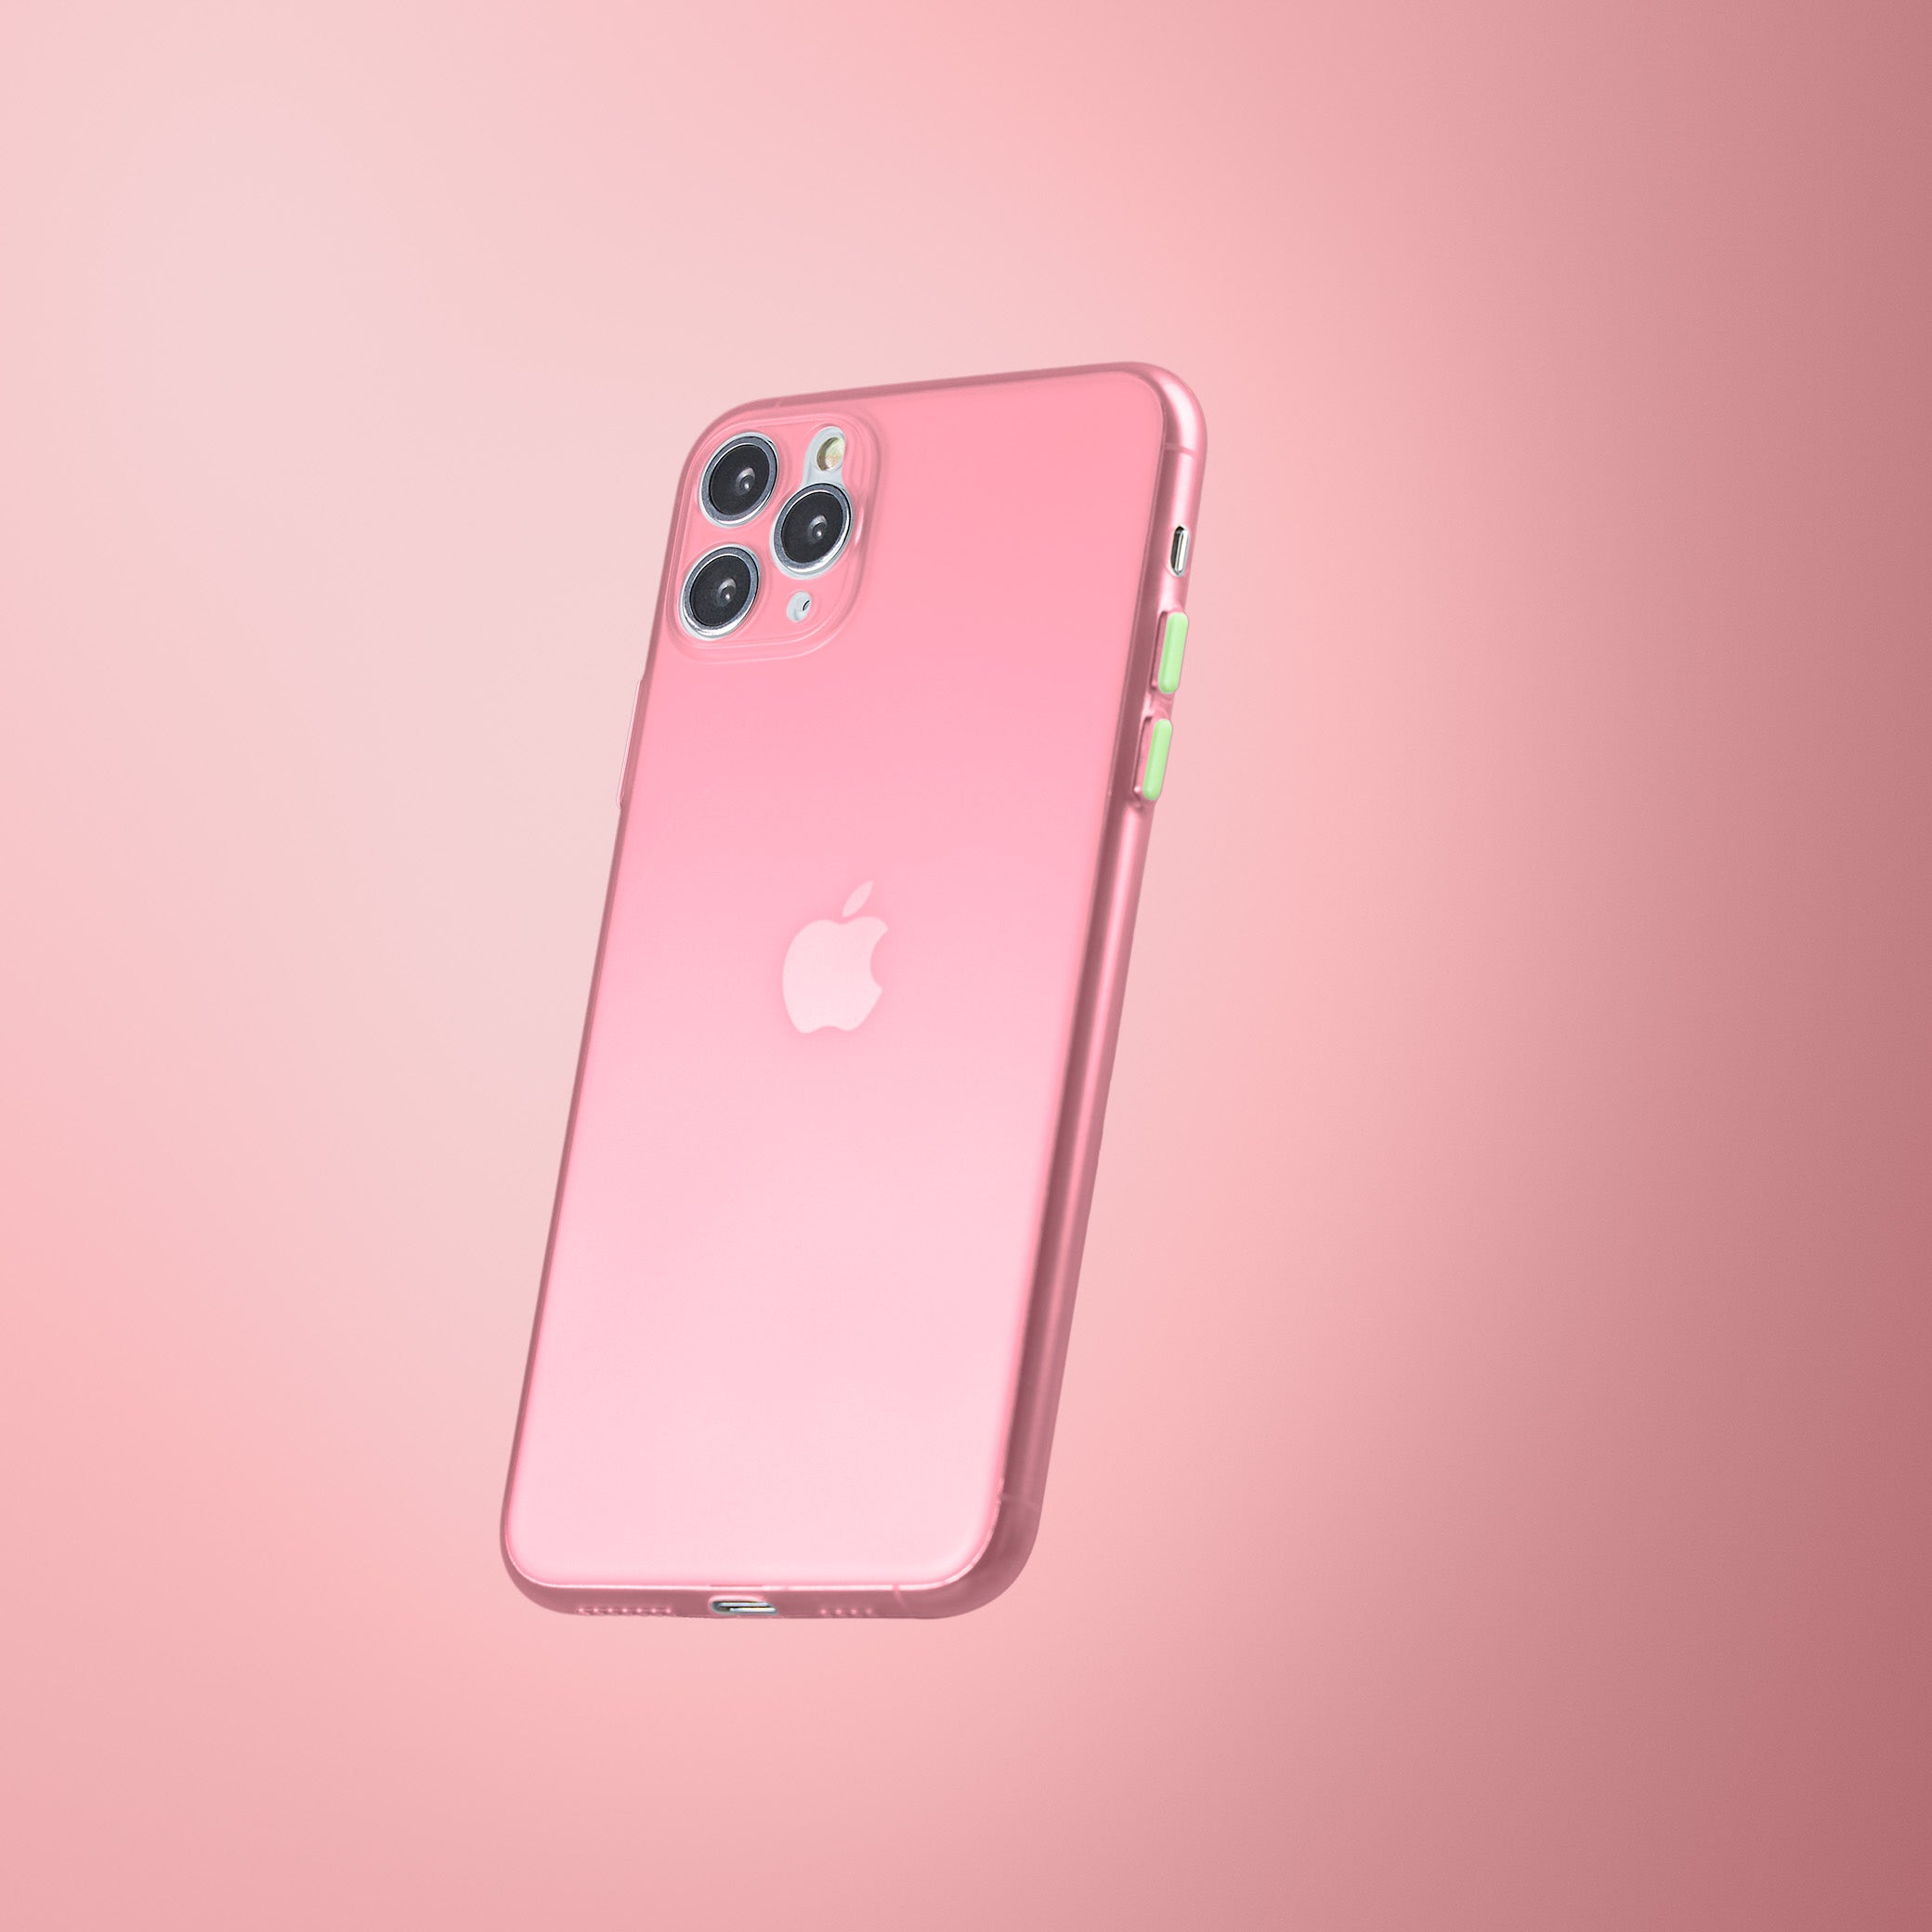 Super Slim Case 2.0 for iPhone 11 Pro Max - Pink Cotton Candy